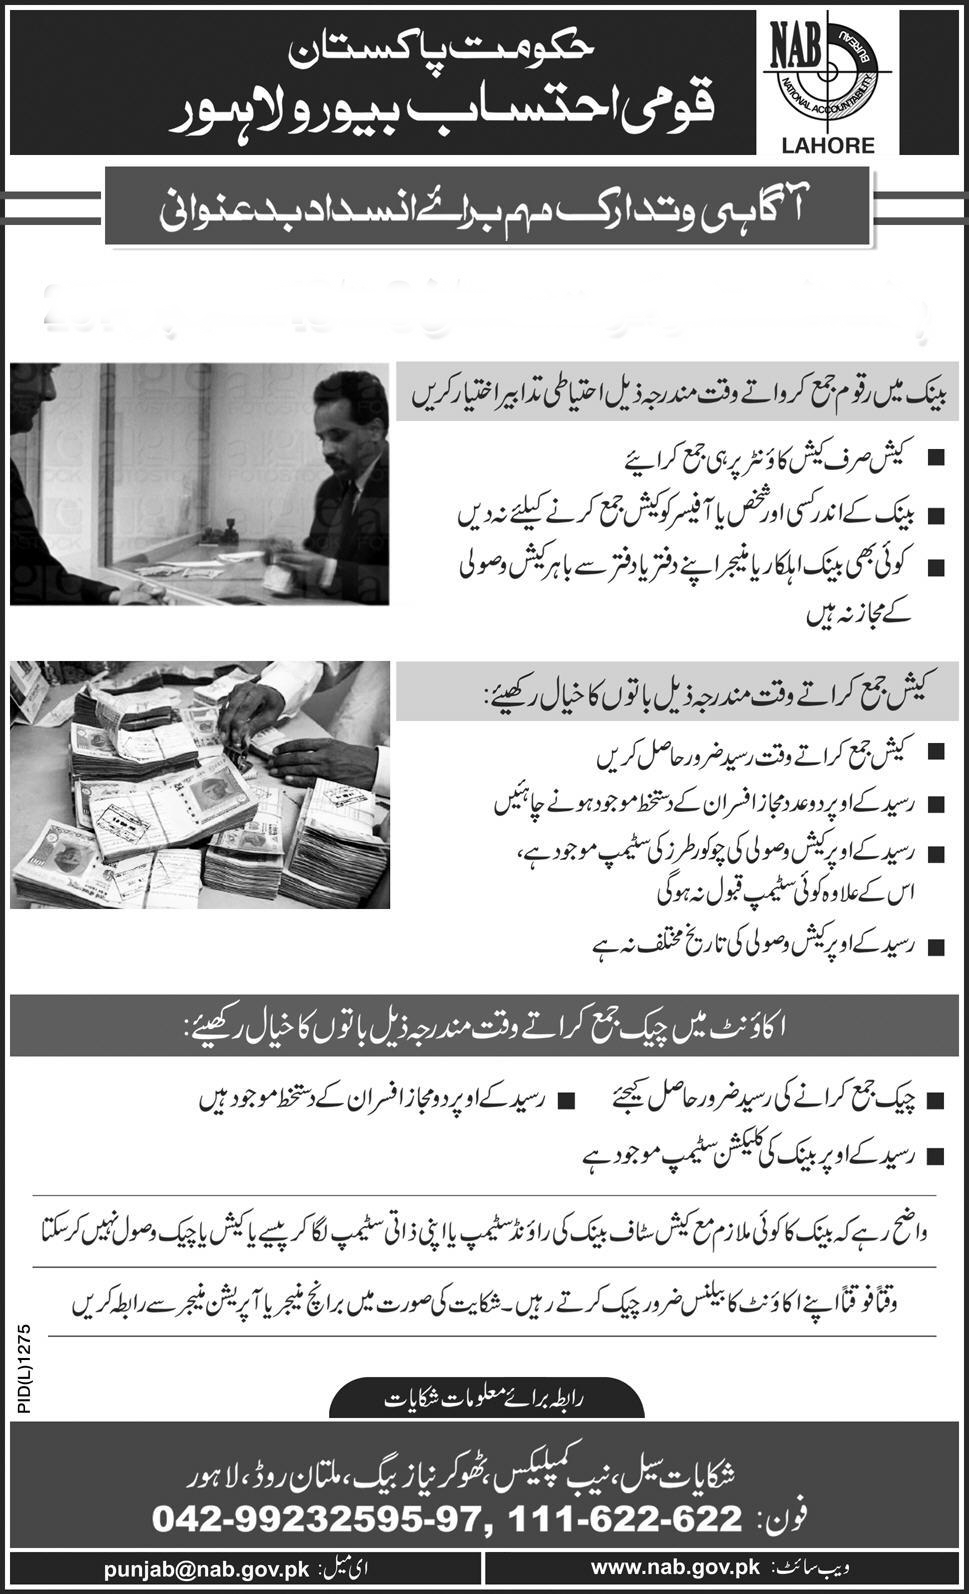 How to Prevent Bank Fraud? Tips in Urdu & English Languages